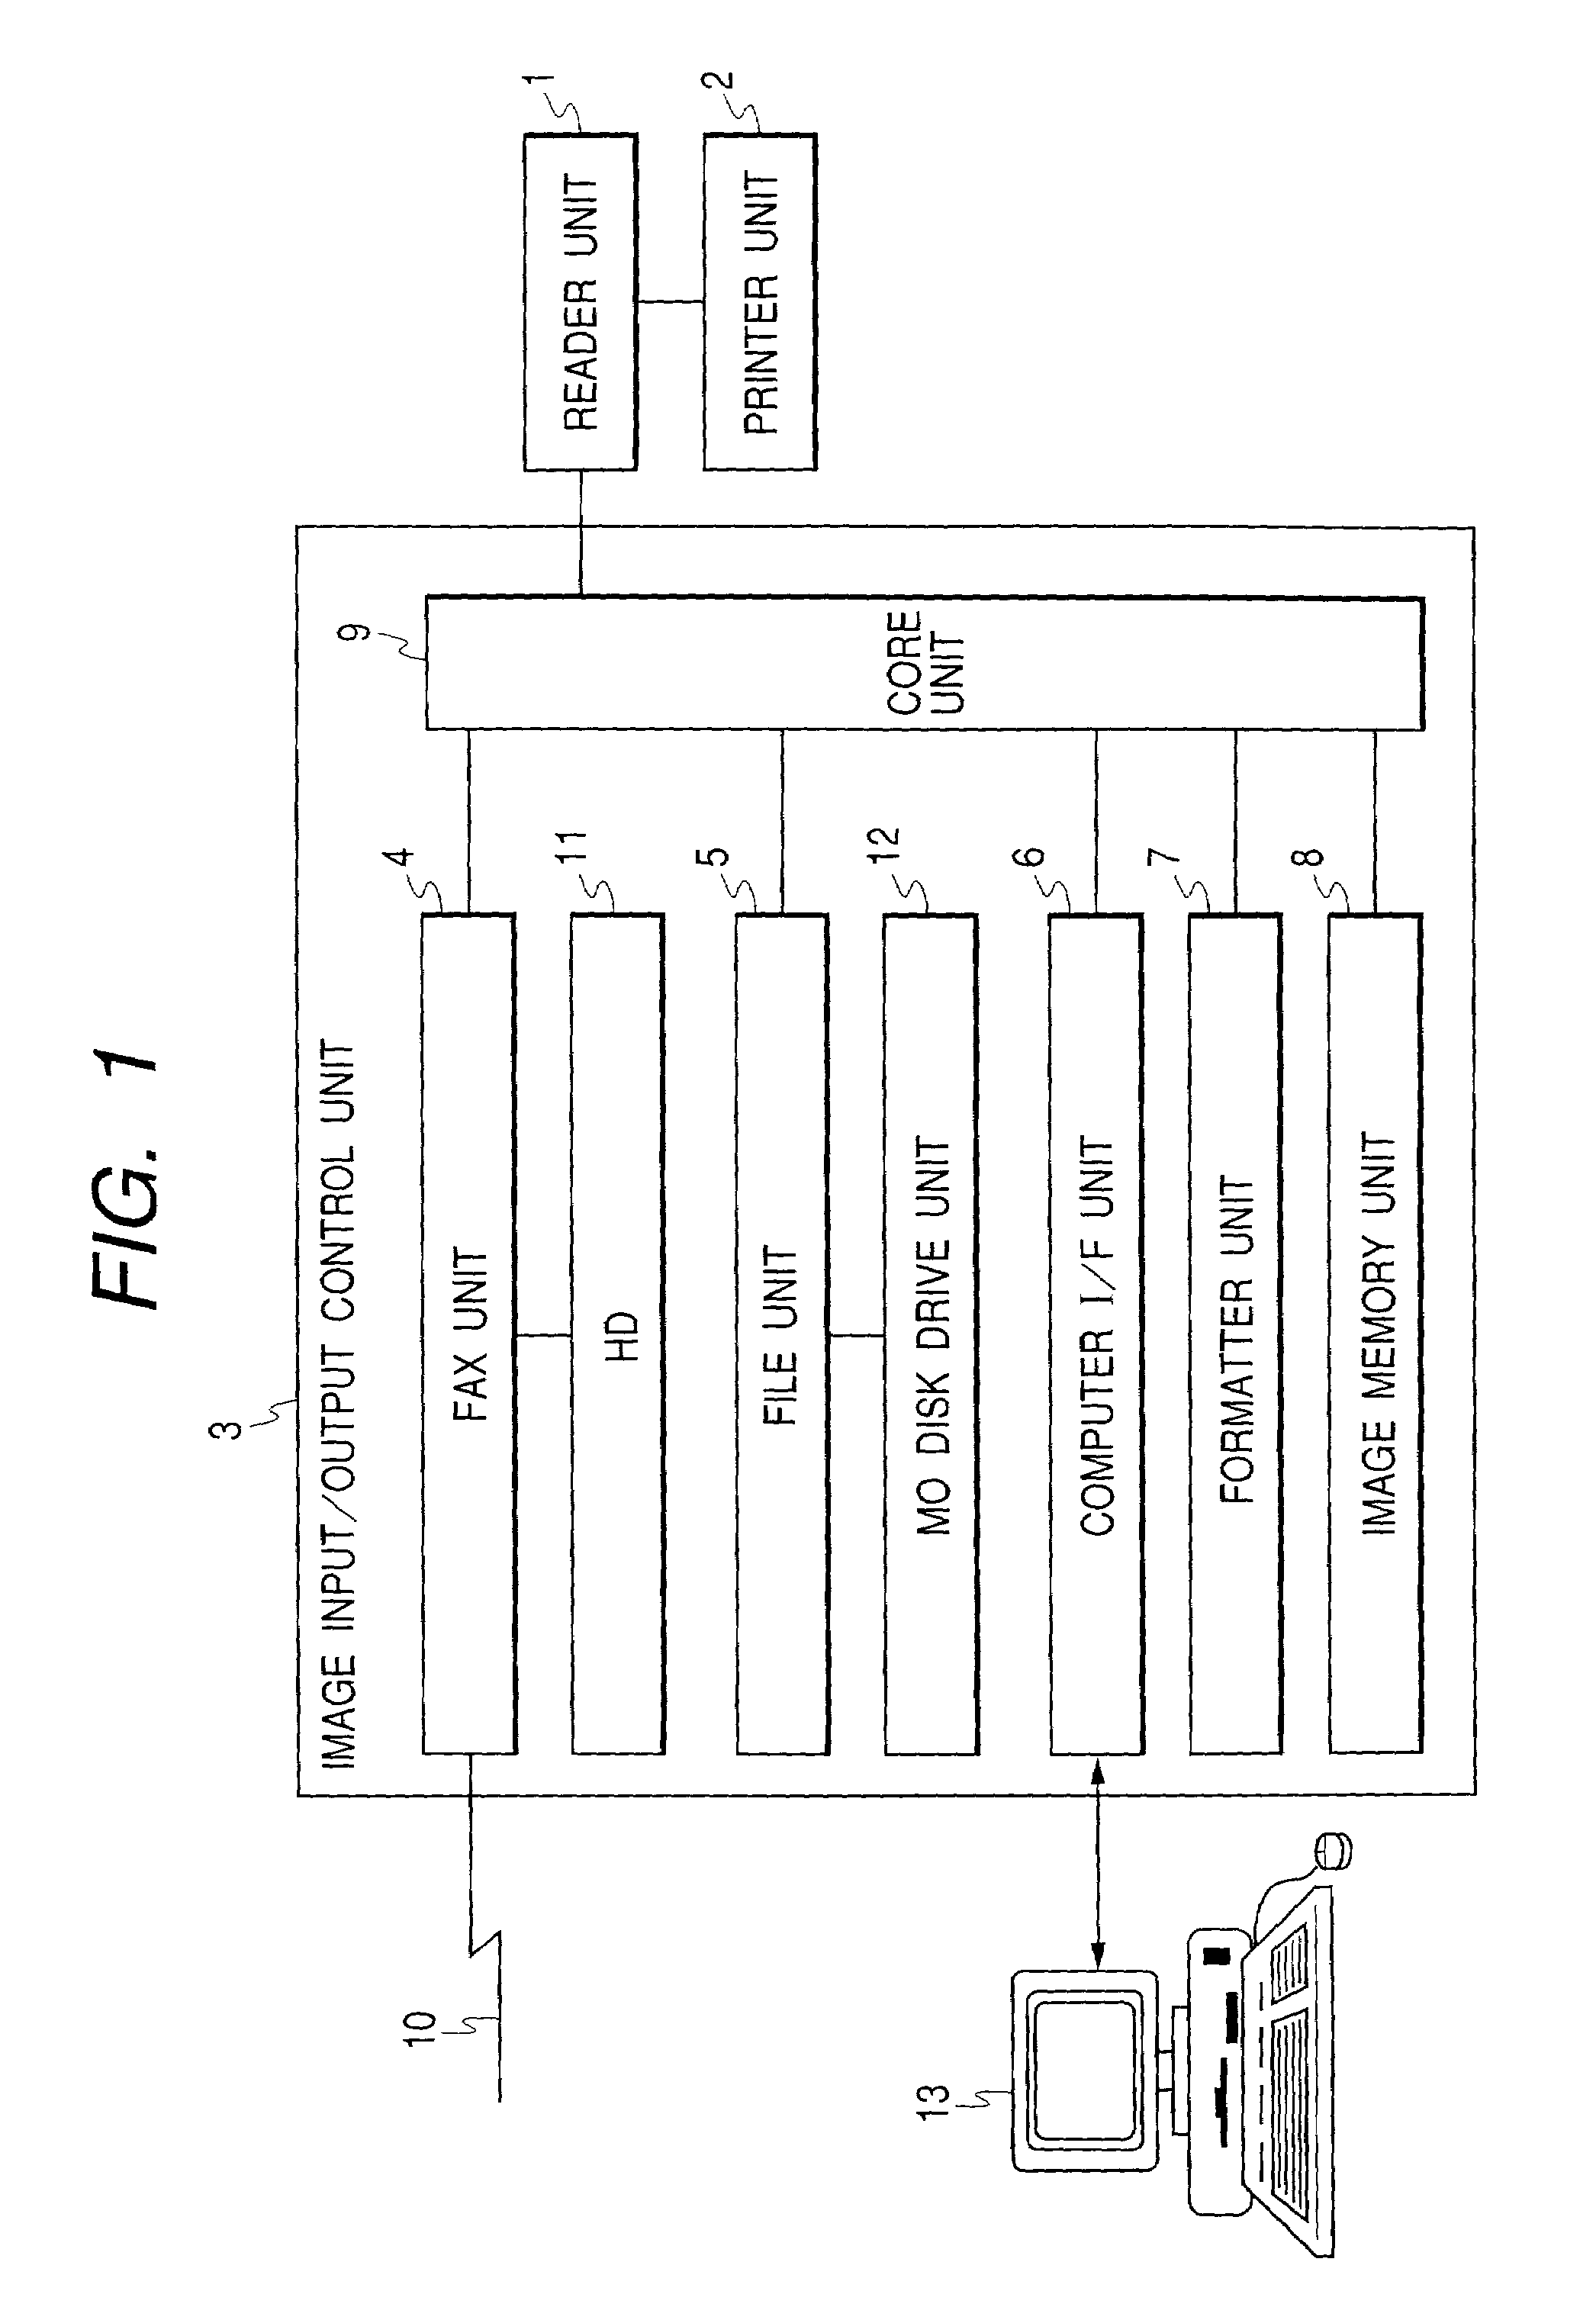 Image processing method and apparatus capable of rotating and reversing an input image